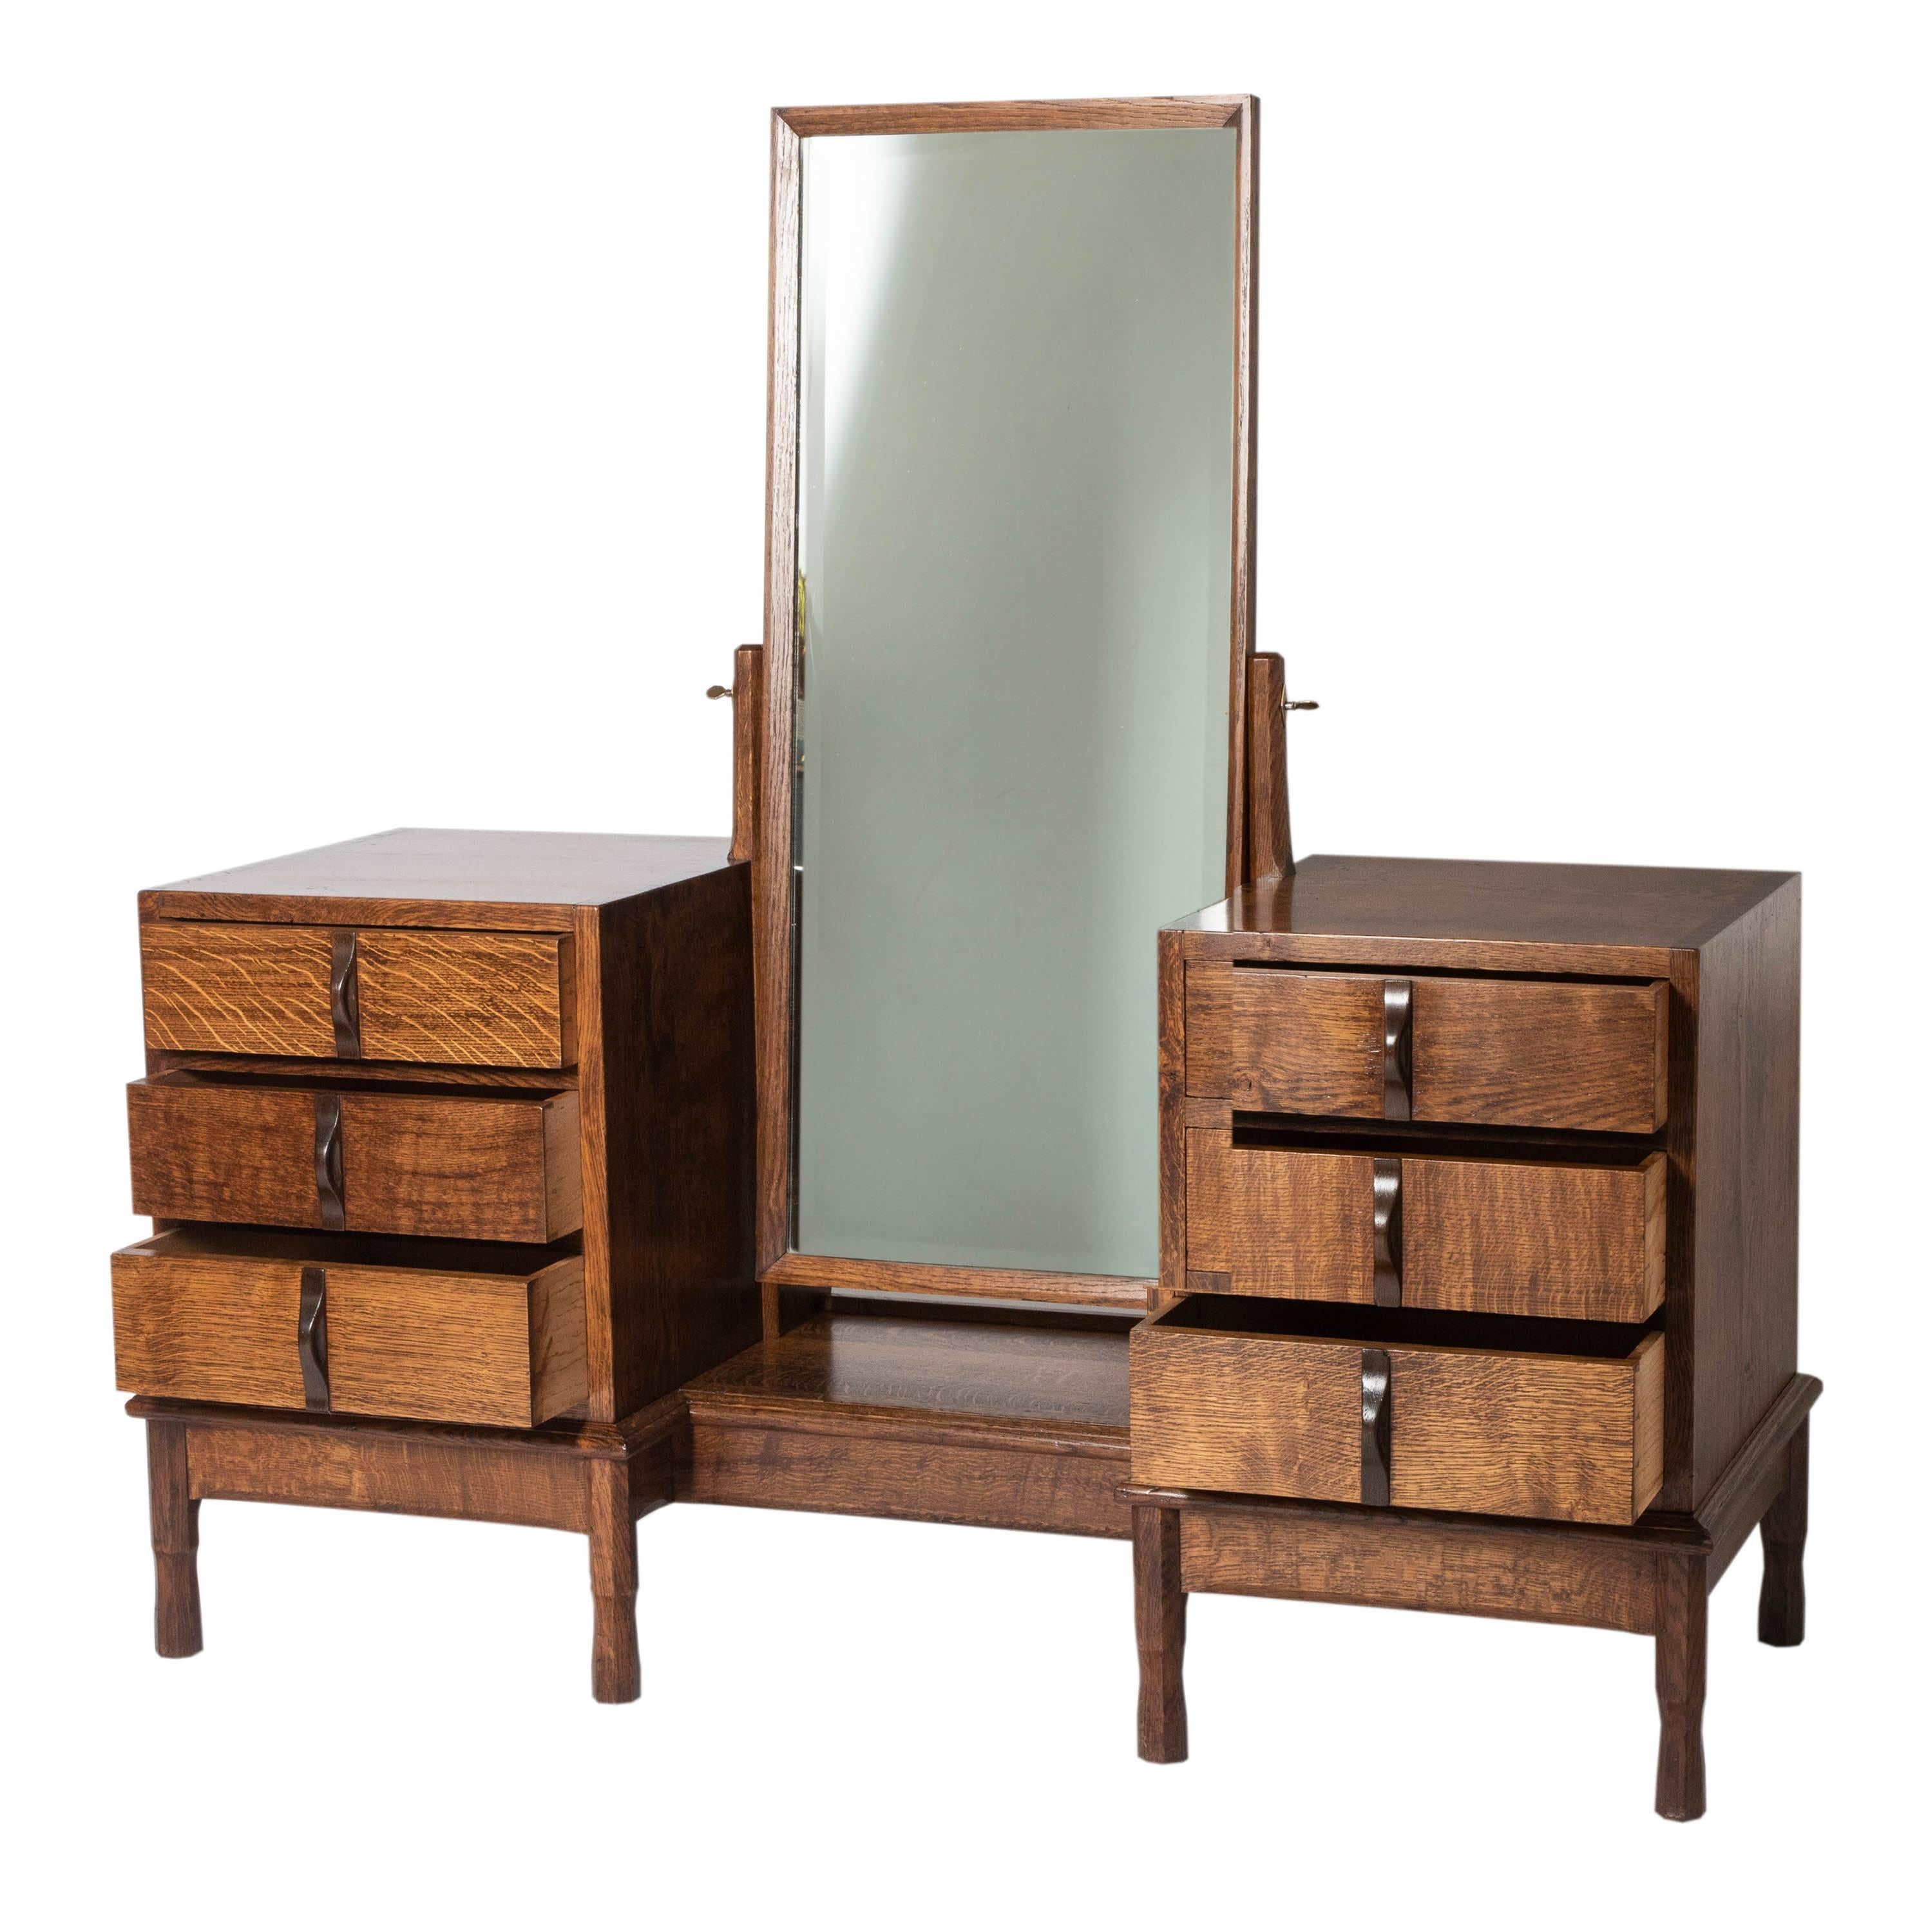 A Gordon Russell oak dressing table.
Mirror flanked with drawers.
Bog oak handles.
England, circa 1928
Measures: 140 cm H x 139 cm W x 53 cm D
Provenance: Purchased from Gordon Russell by Mrs Hart of Erdington as a wedding gift for her daughter